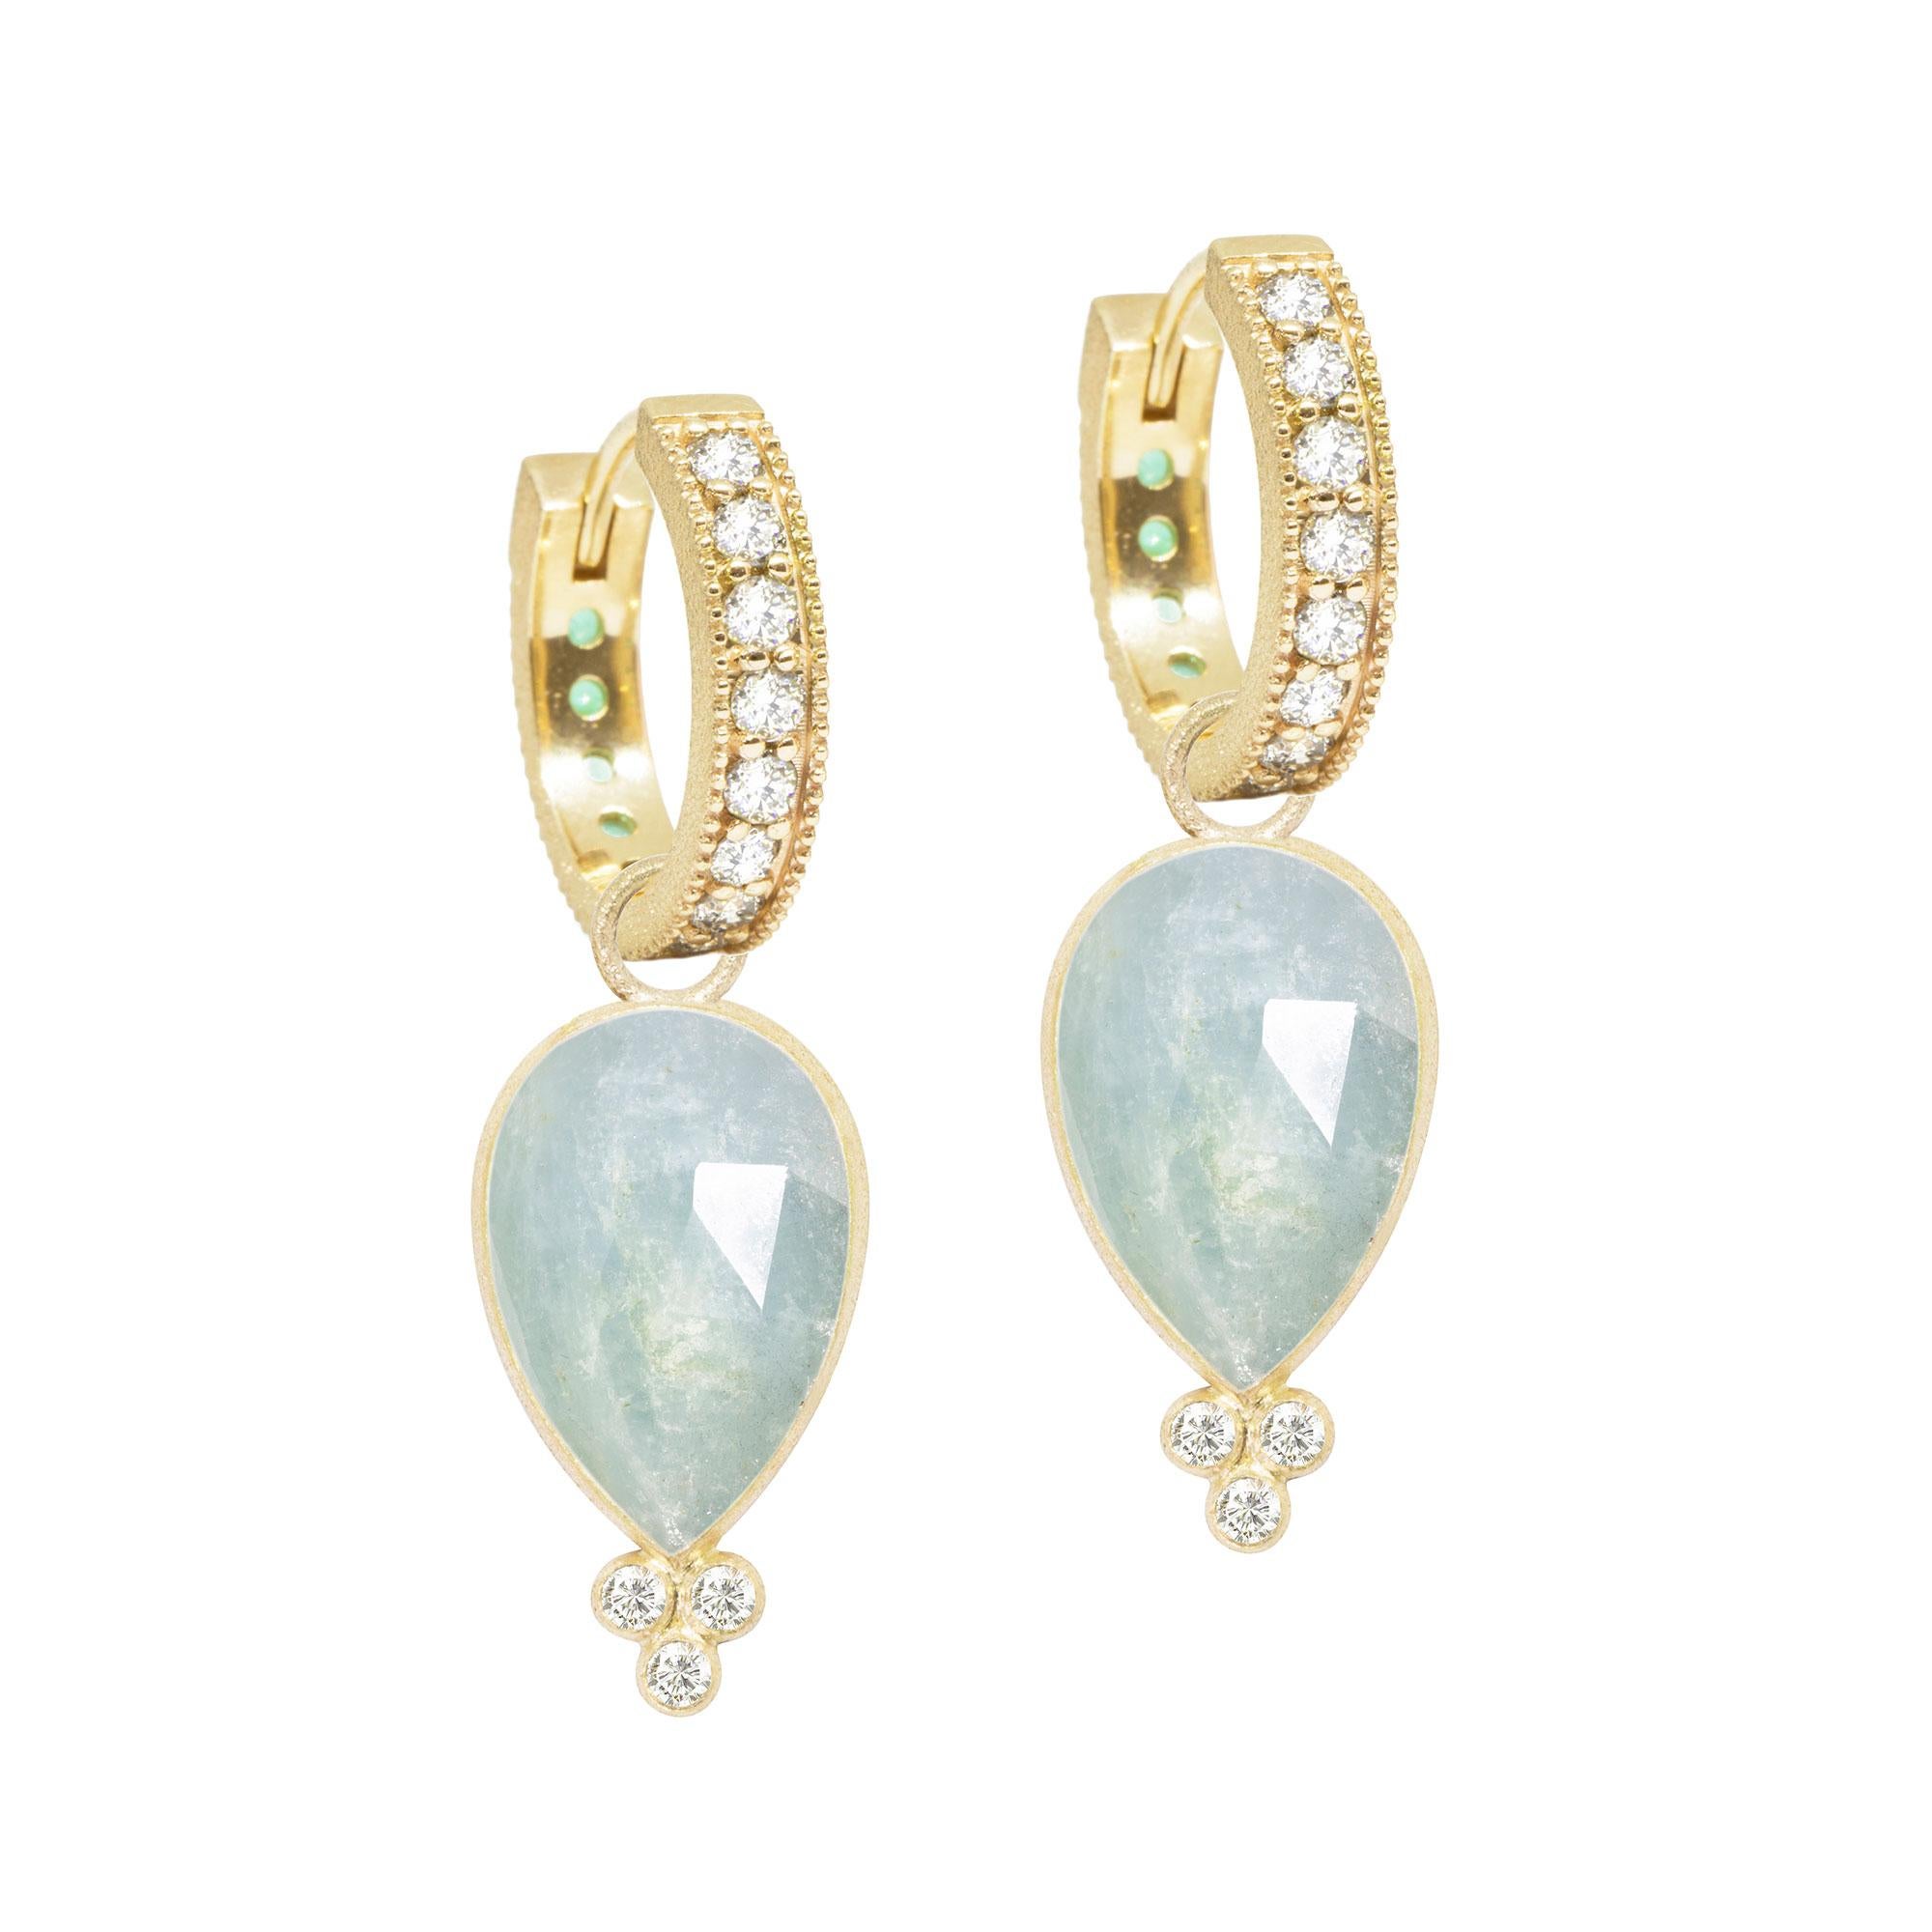 With rich, regal aquamarine in a petal-like pear shape, the diamond-accented Mia Small Gold Charms bloom with any of our hoops and mix well with other styles.


Nina Wynn Design's patent-pending earrings have an element on the back of the stud or